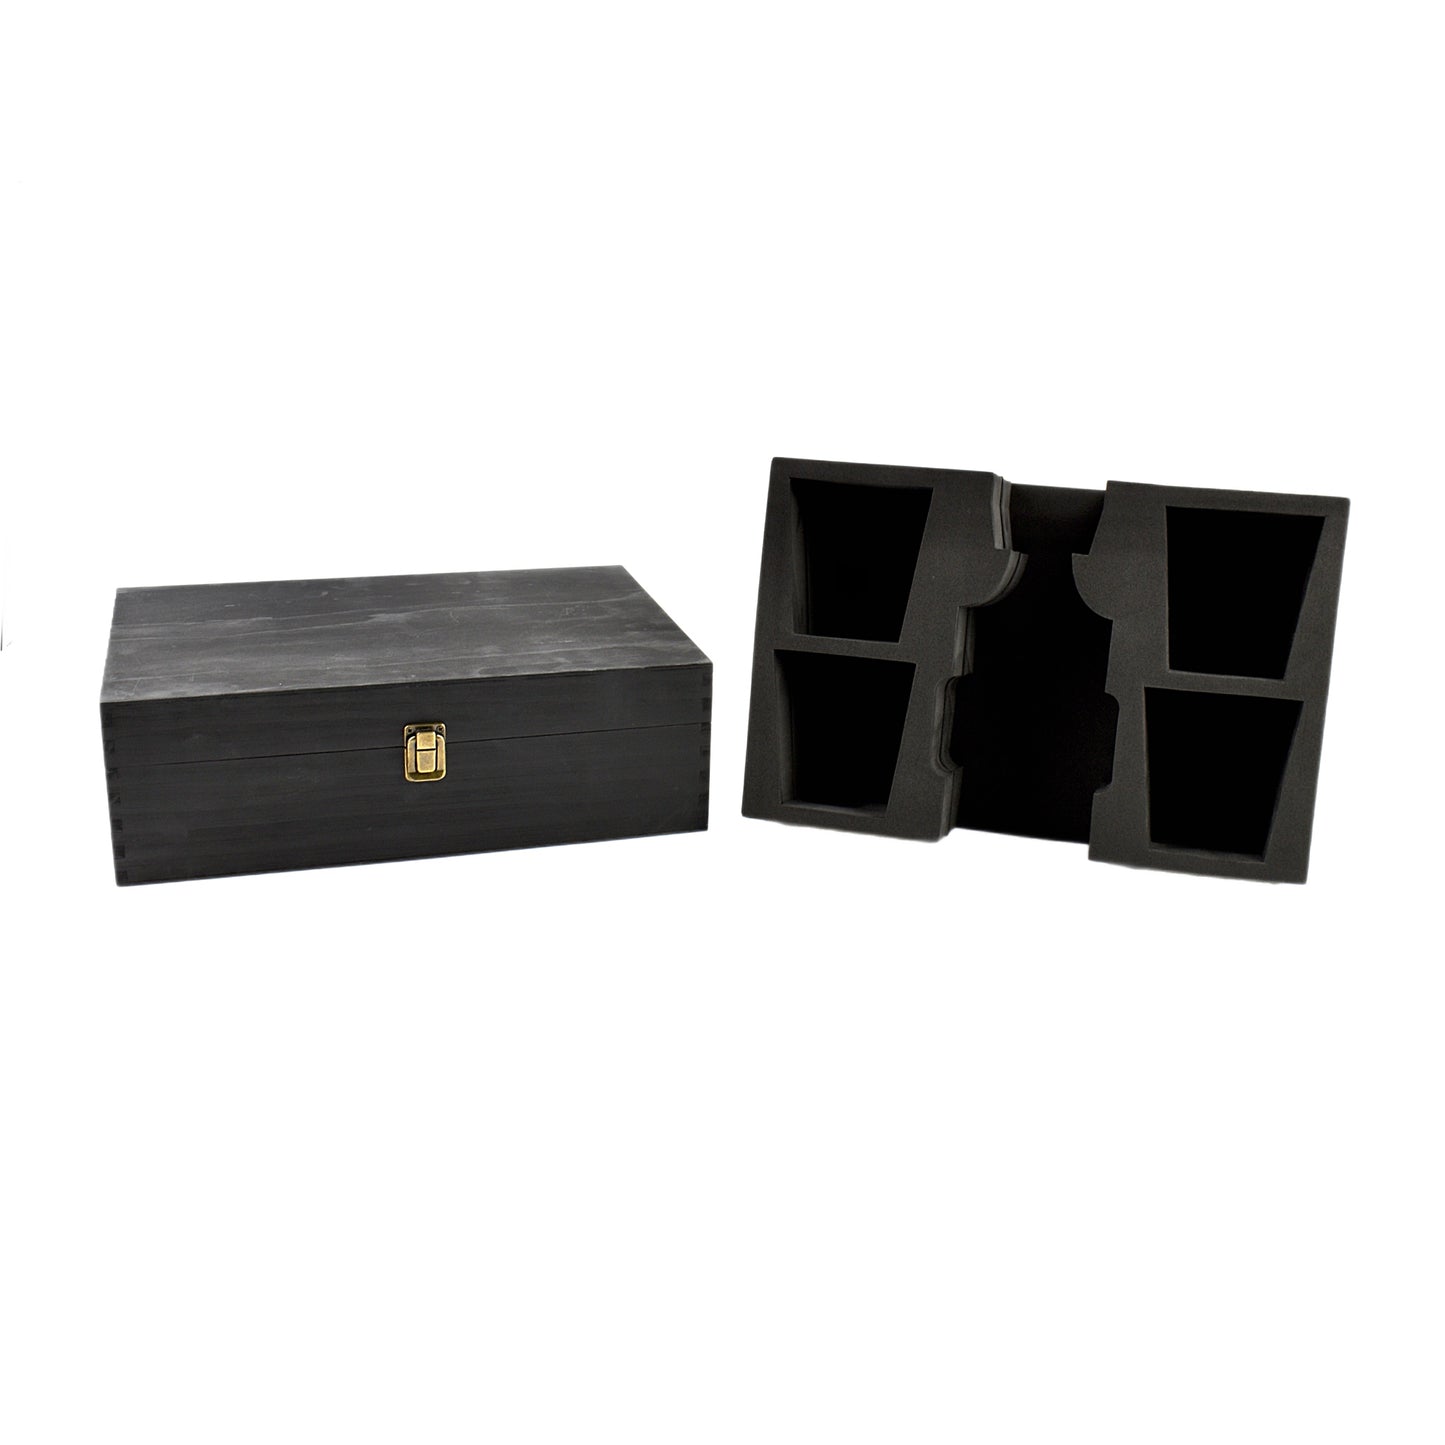 XL Box Foam Set For 1 Decanter and 4 Glasses